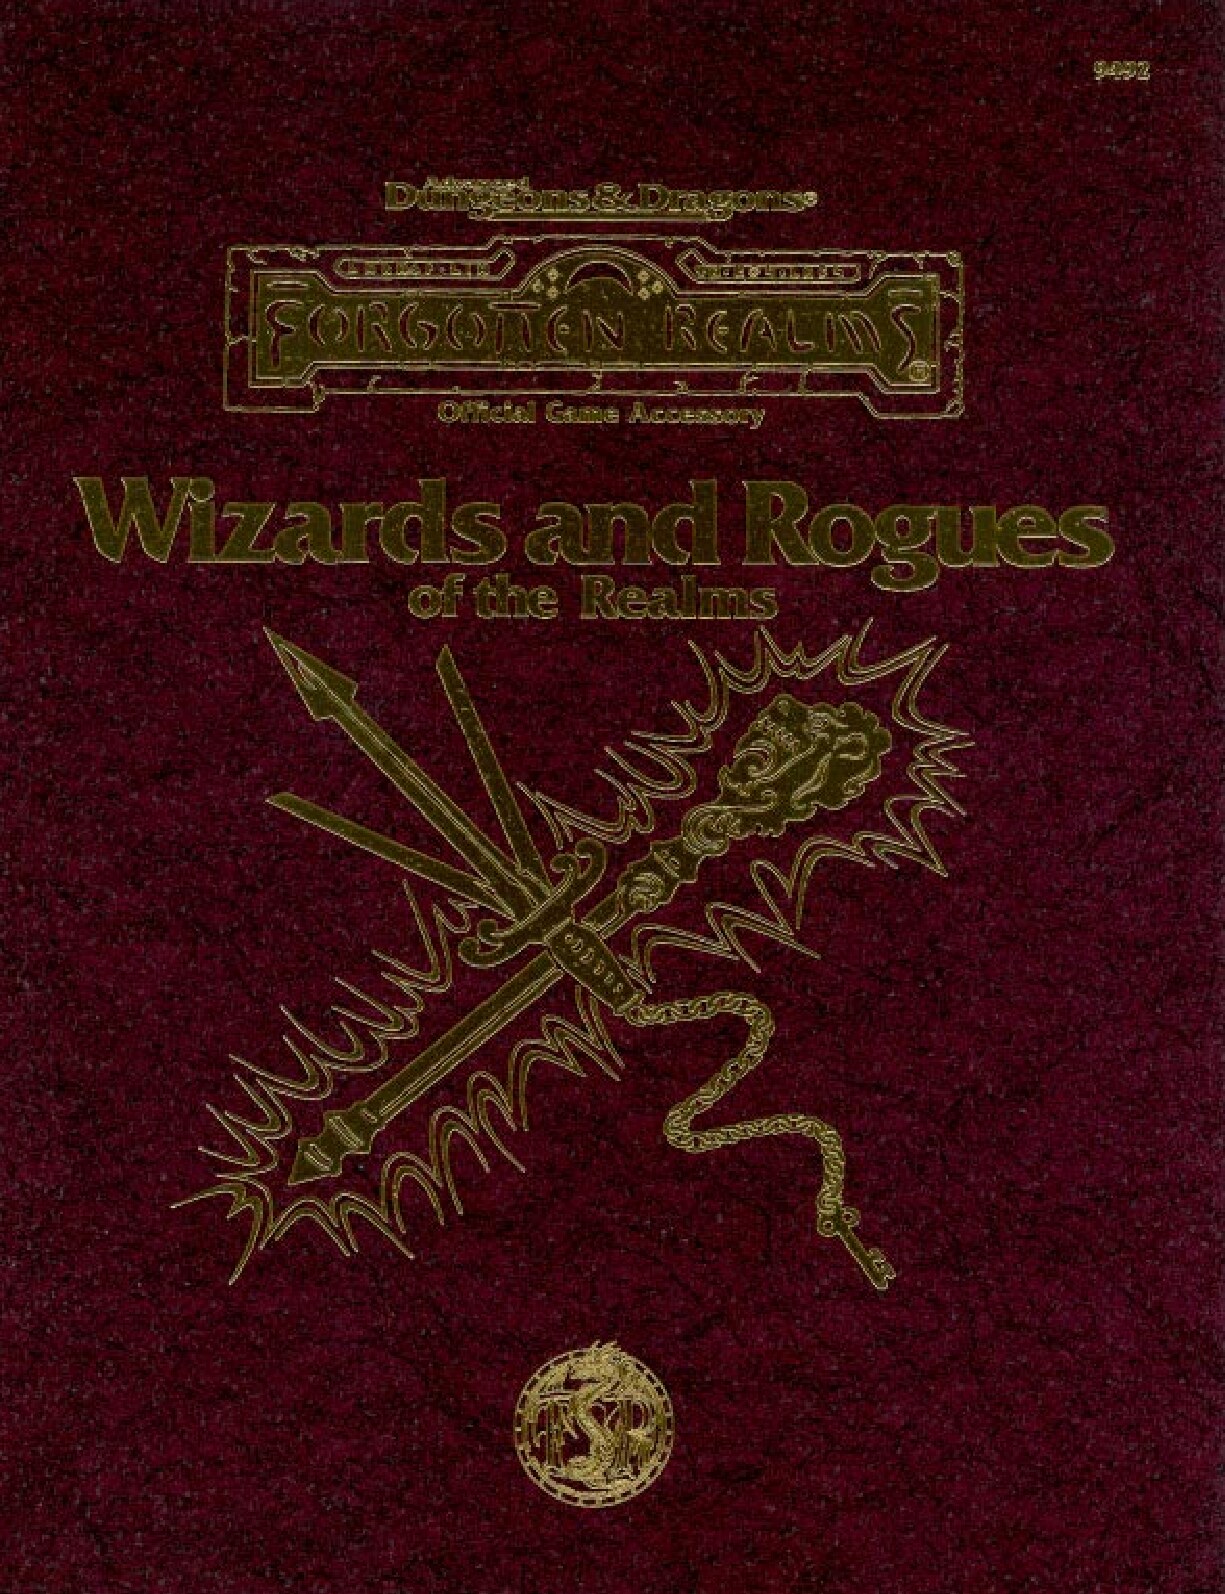 Wizards and Rogues of the Realms